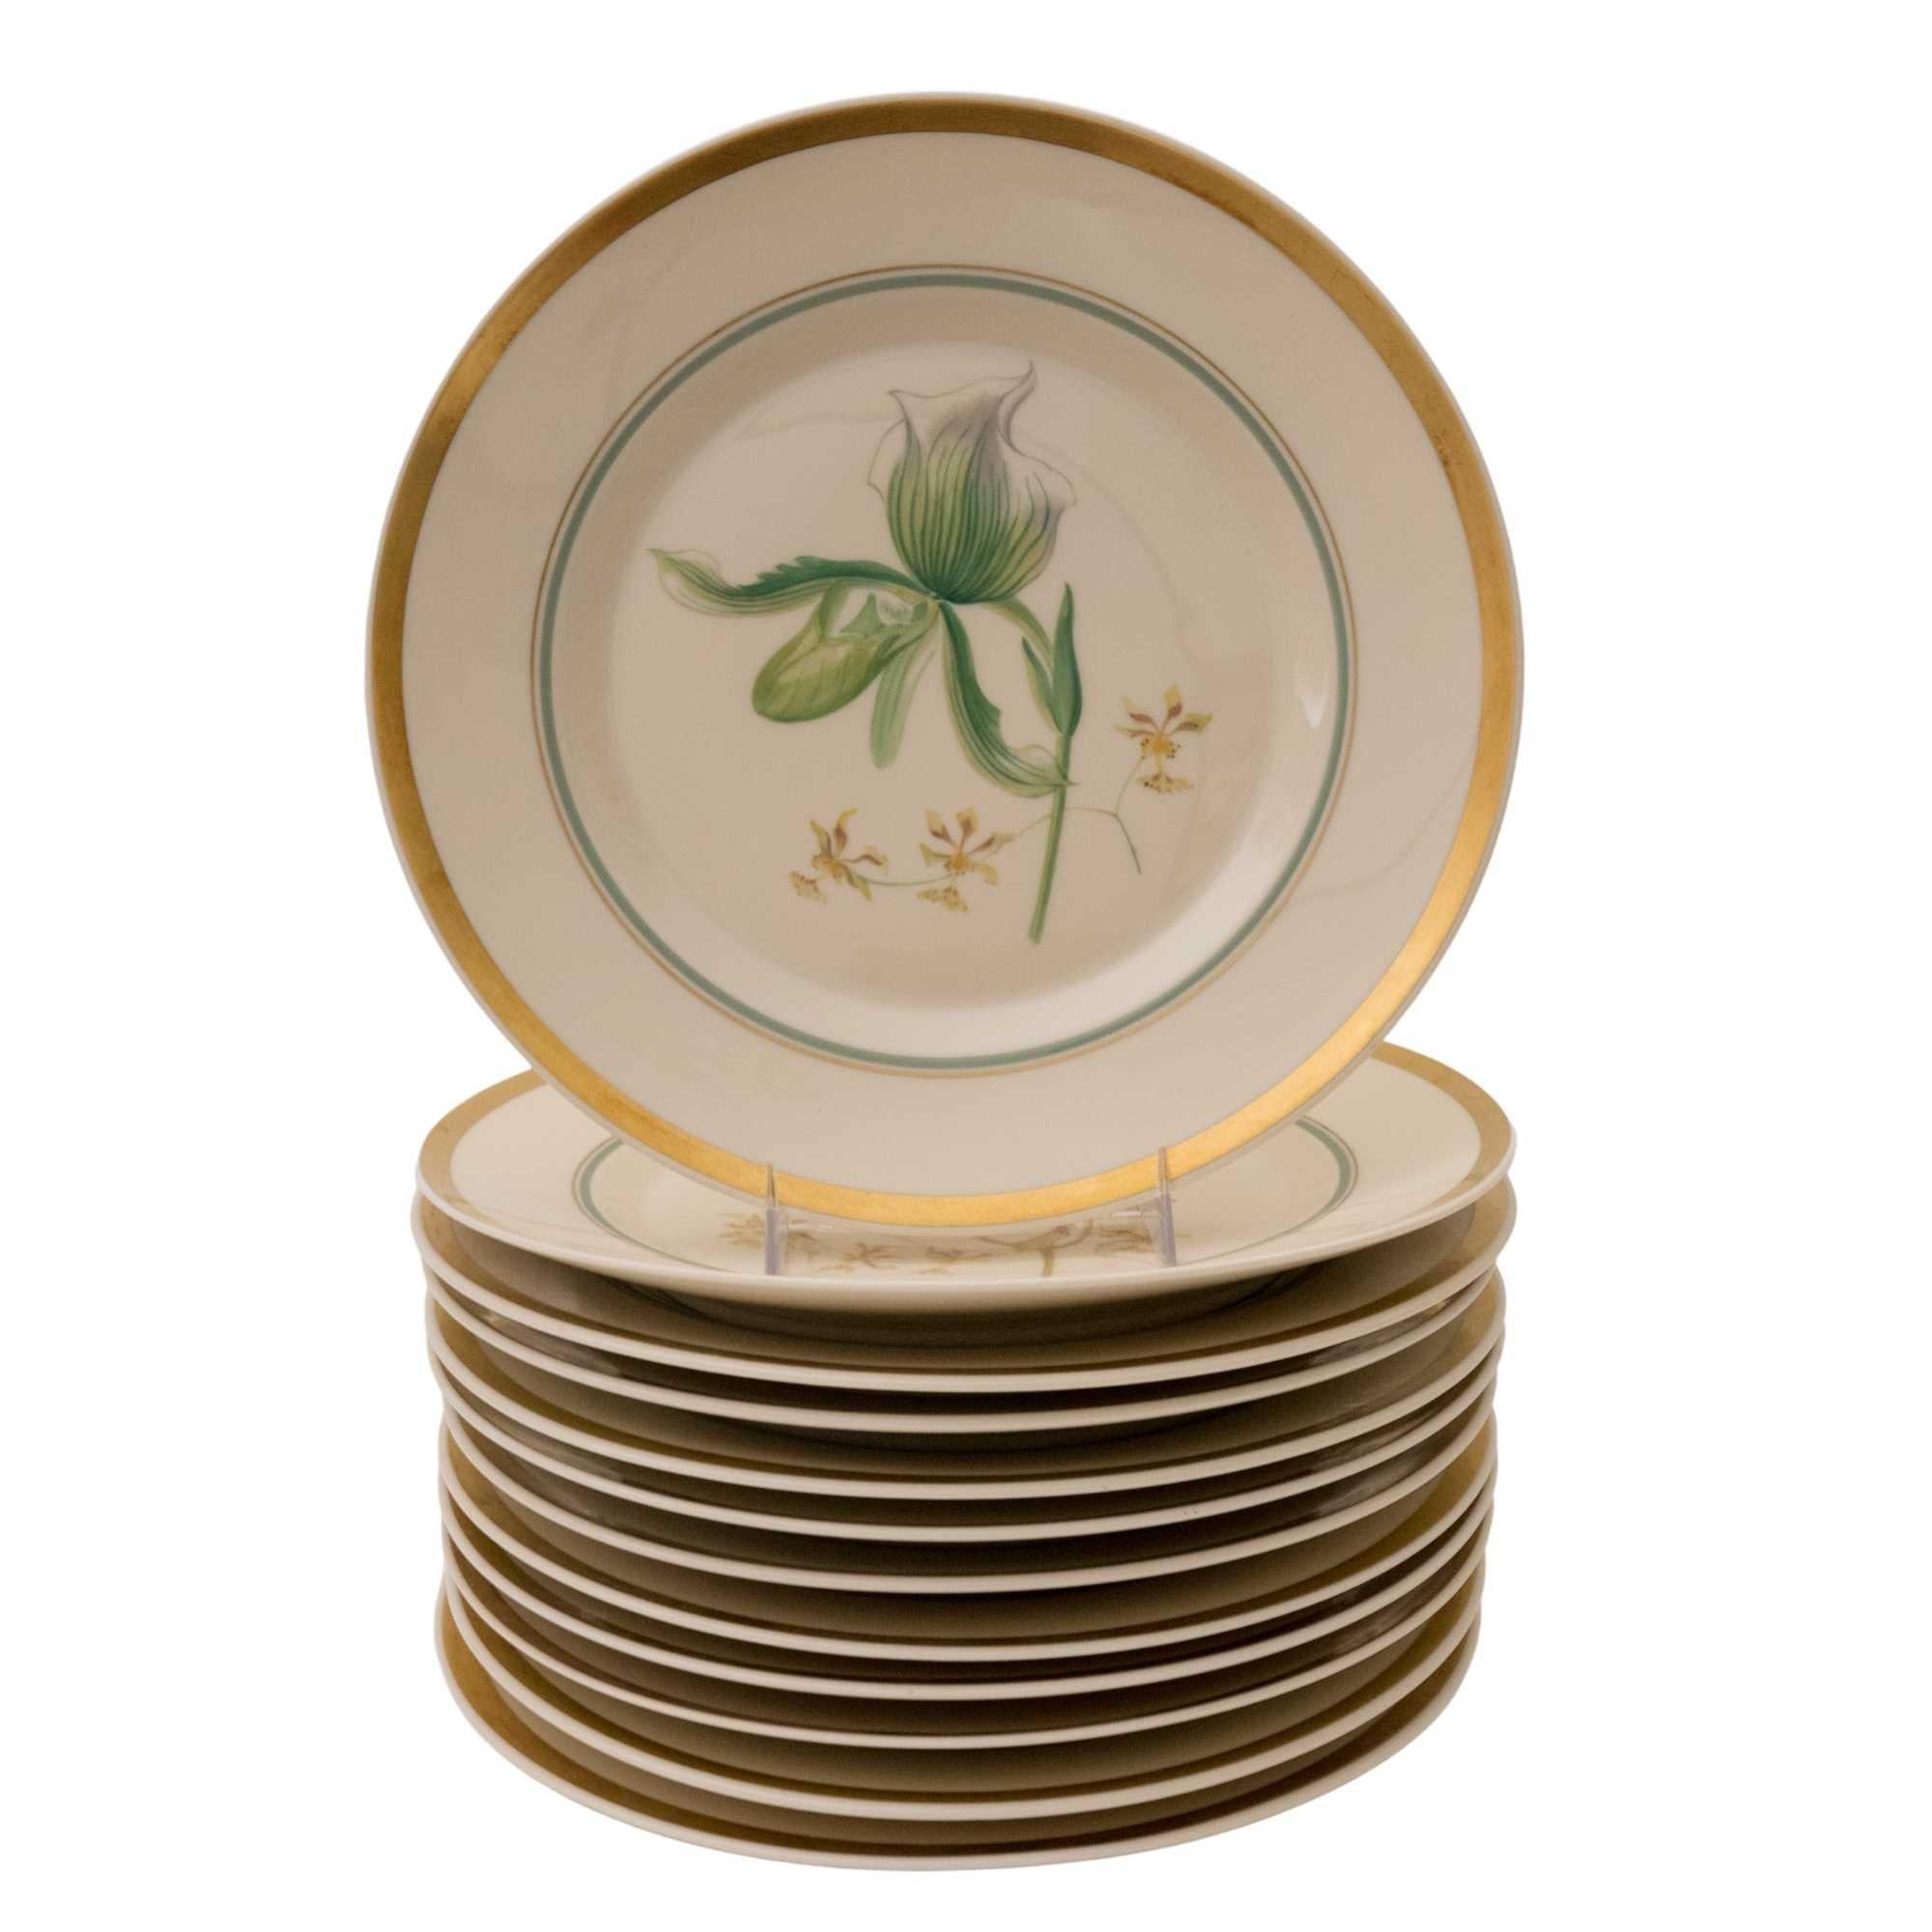 From the storied Danish firm re known for their Flora Danica pattern, we have a set of 12 hand painted and beautifully designed plates. Each orchid species is identified on the back on the fully hall marked plate. A pretty green accent band has been